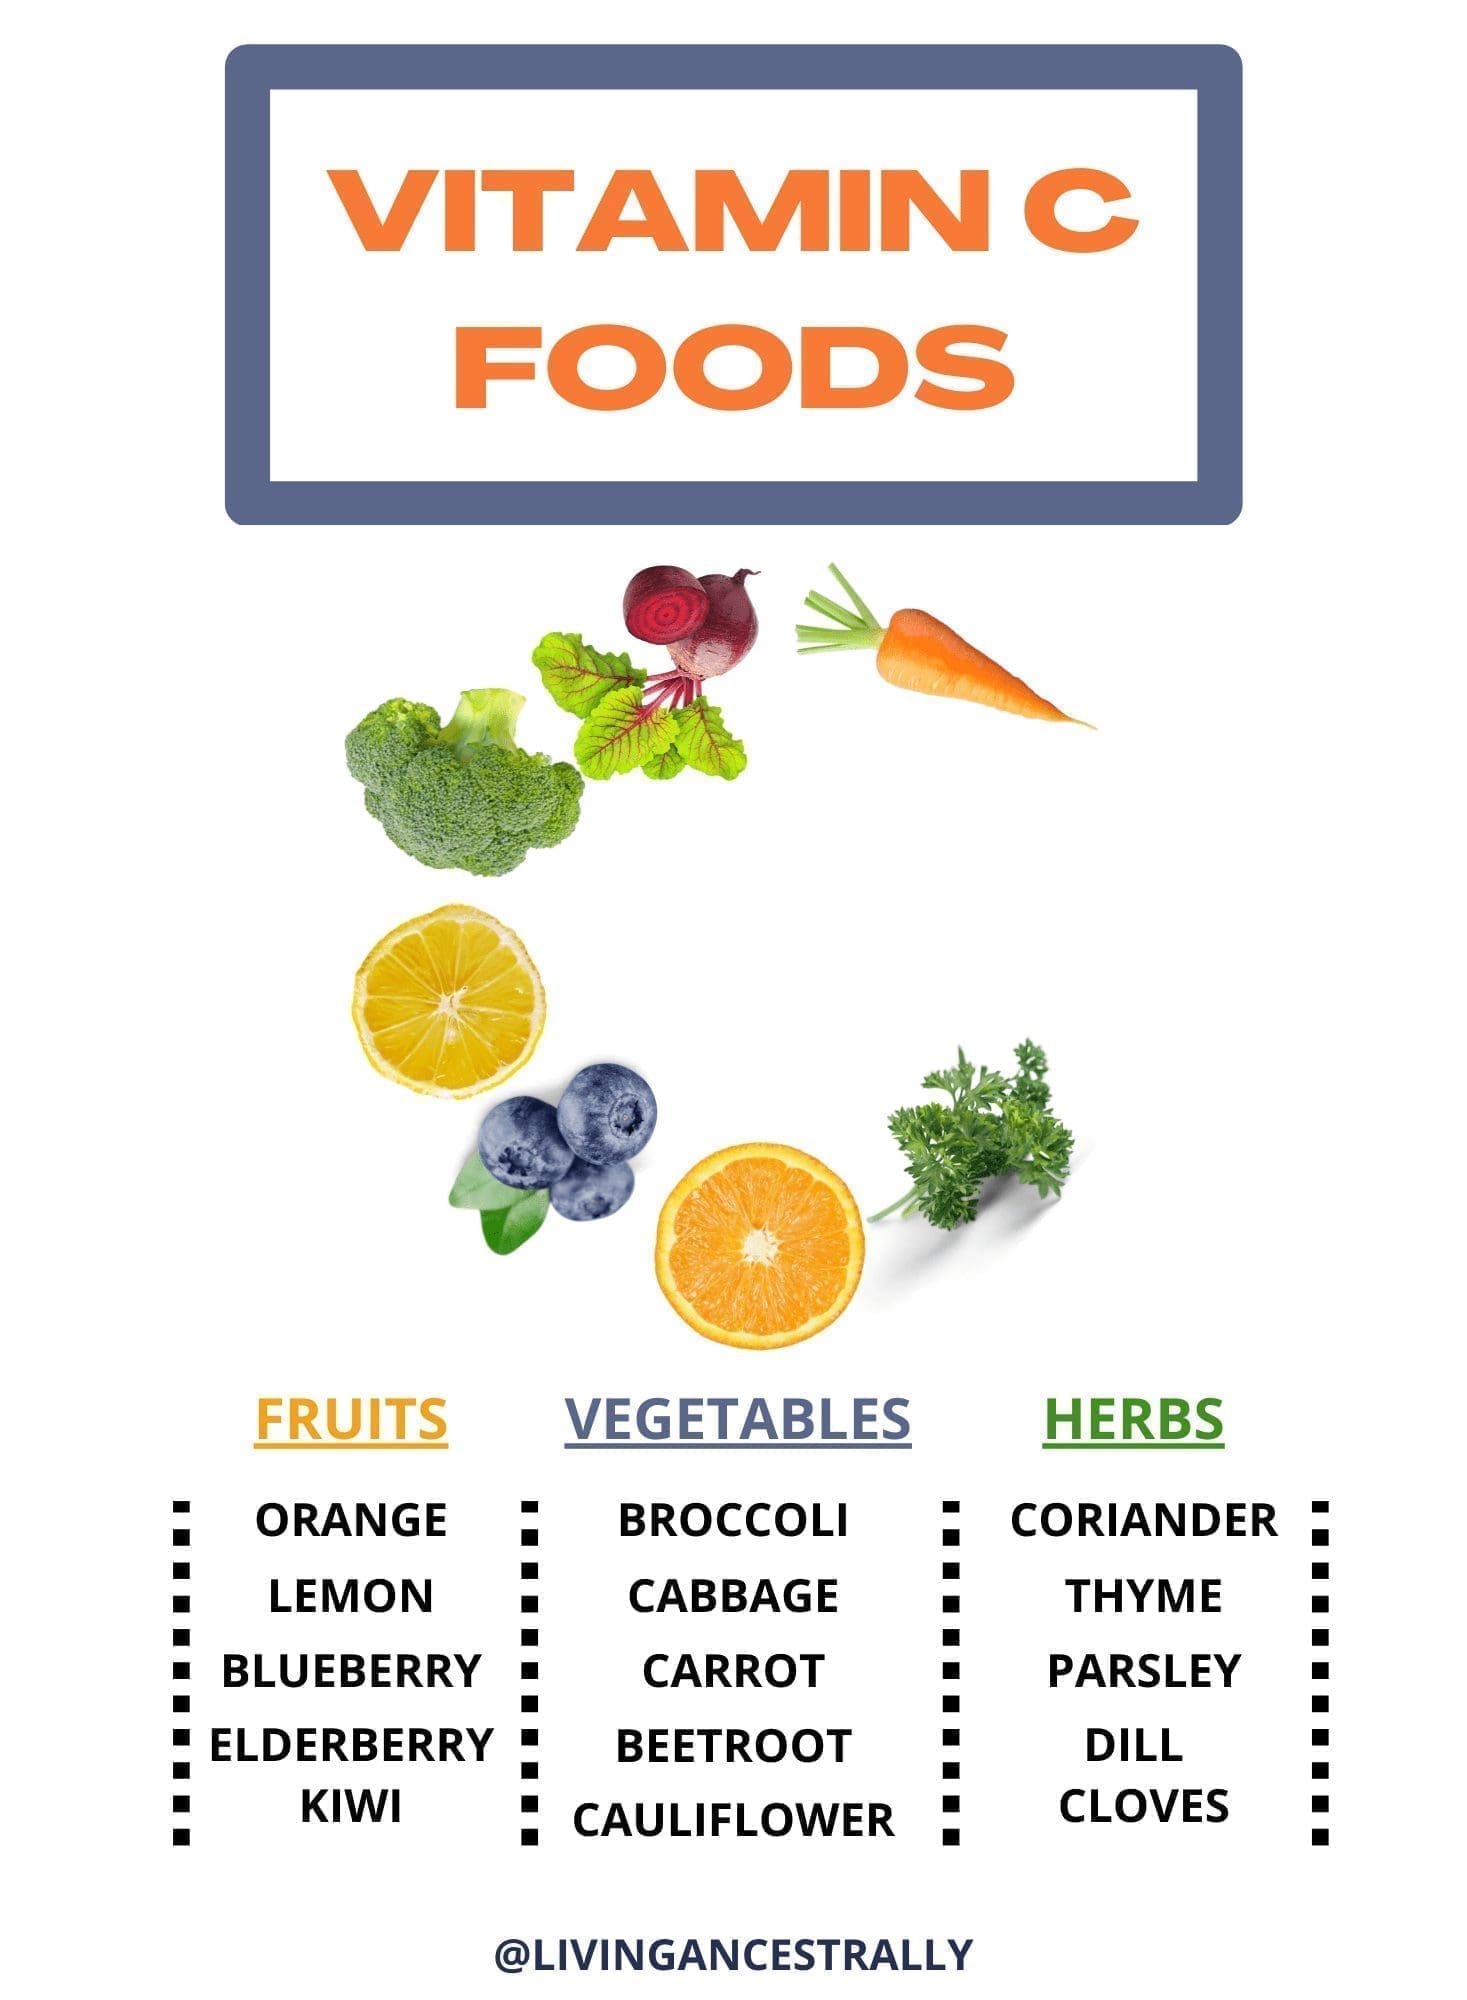 Vitamin C Foods for Energy